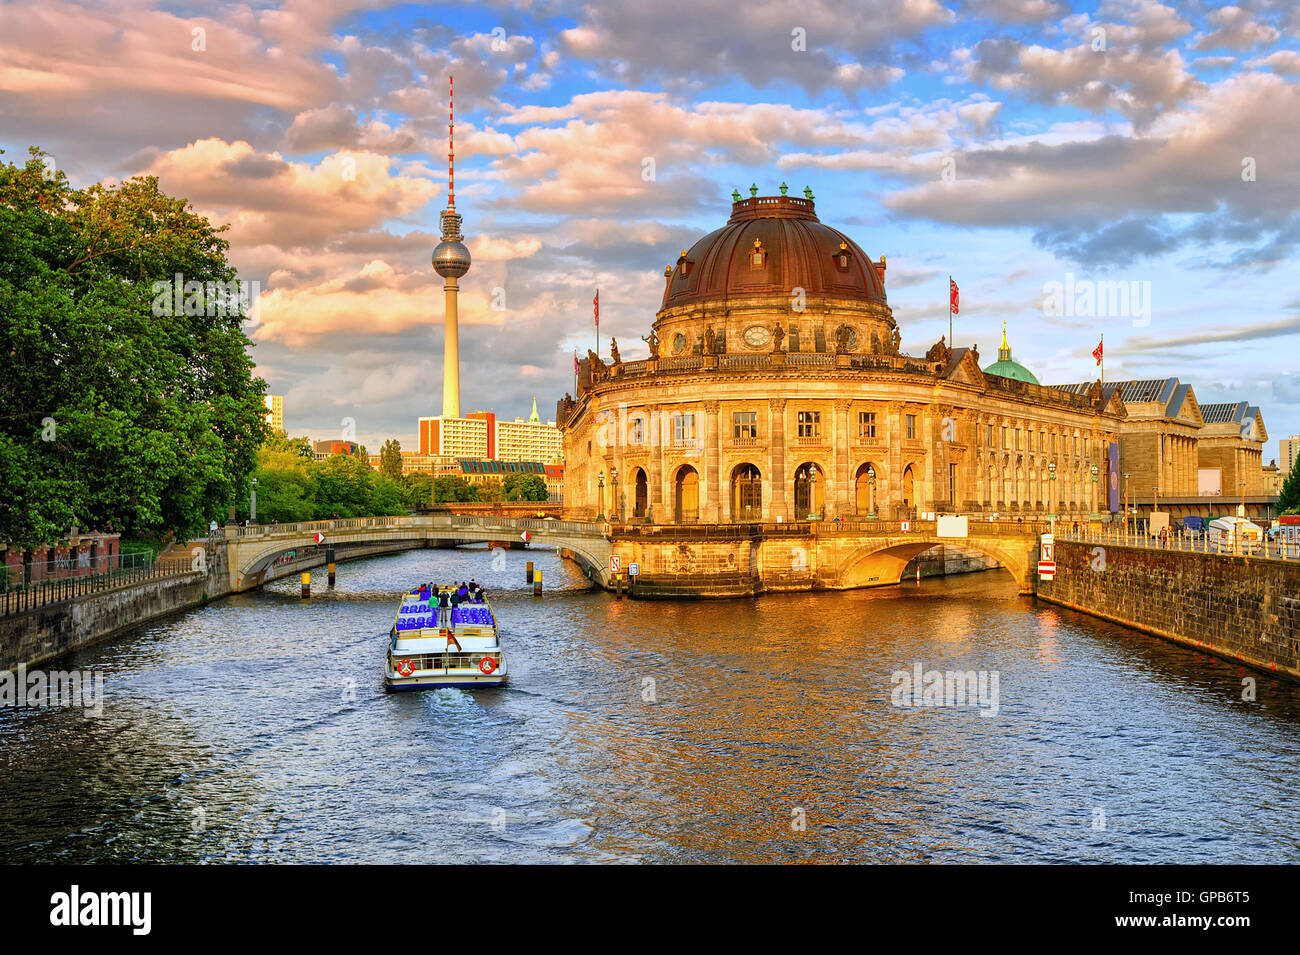 Bode museum on Spree river and Alexanderplatz TV tower in center of Berlin, Germany Stock Photo